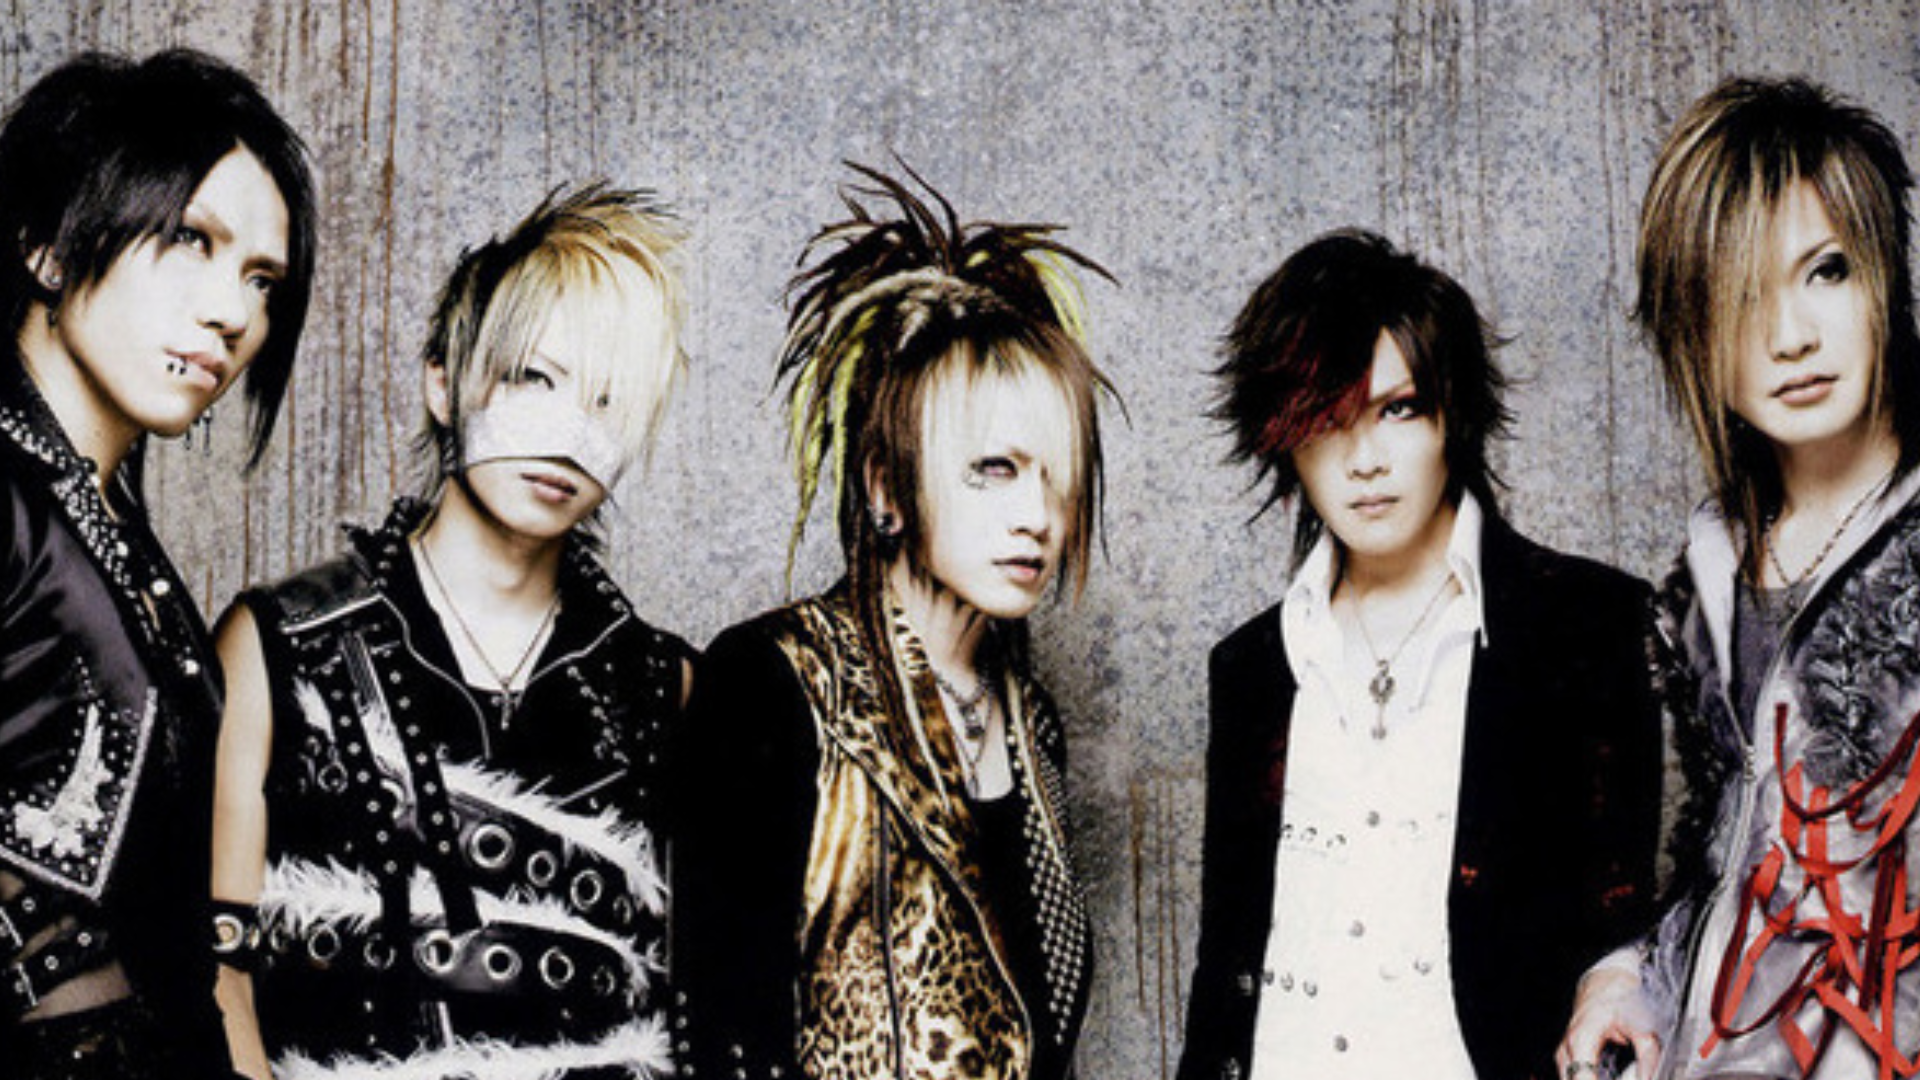 <p>According to TimeOut, ‘Visual Kei’ bands derive from a Japanese subculture where a huge focus is placed on the theatrical appearance of musicians.</p> <p>Image: King Records</p>